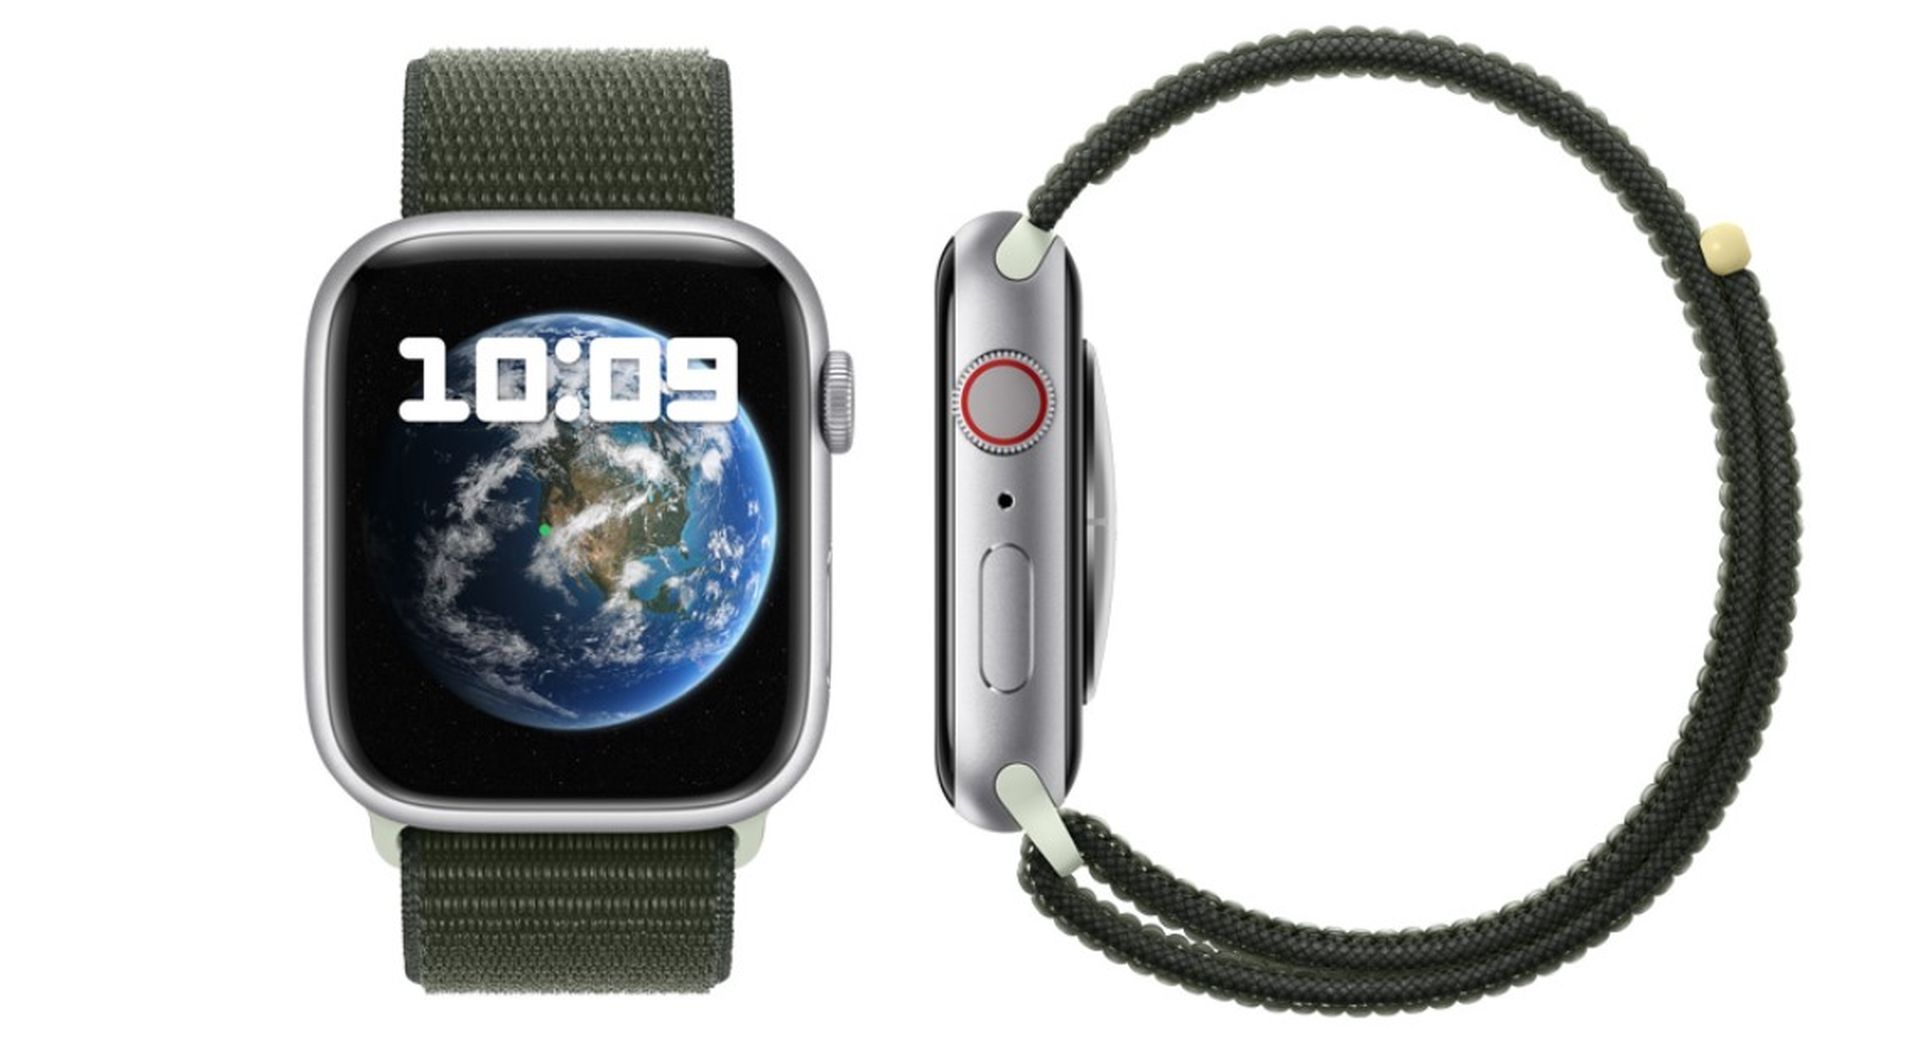 Apple Watches without blood oxygen features go on sale in stores